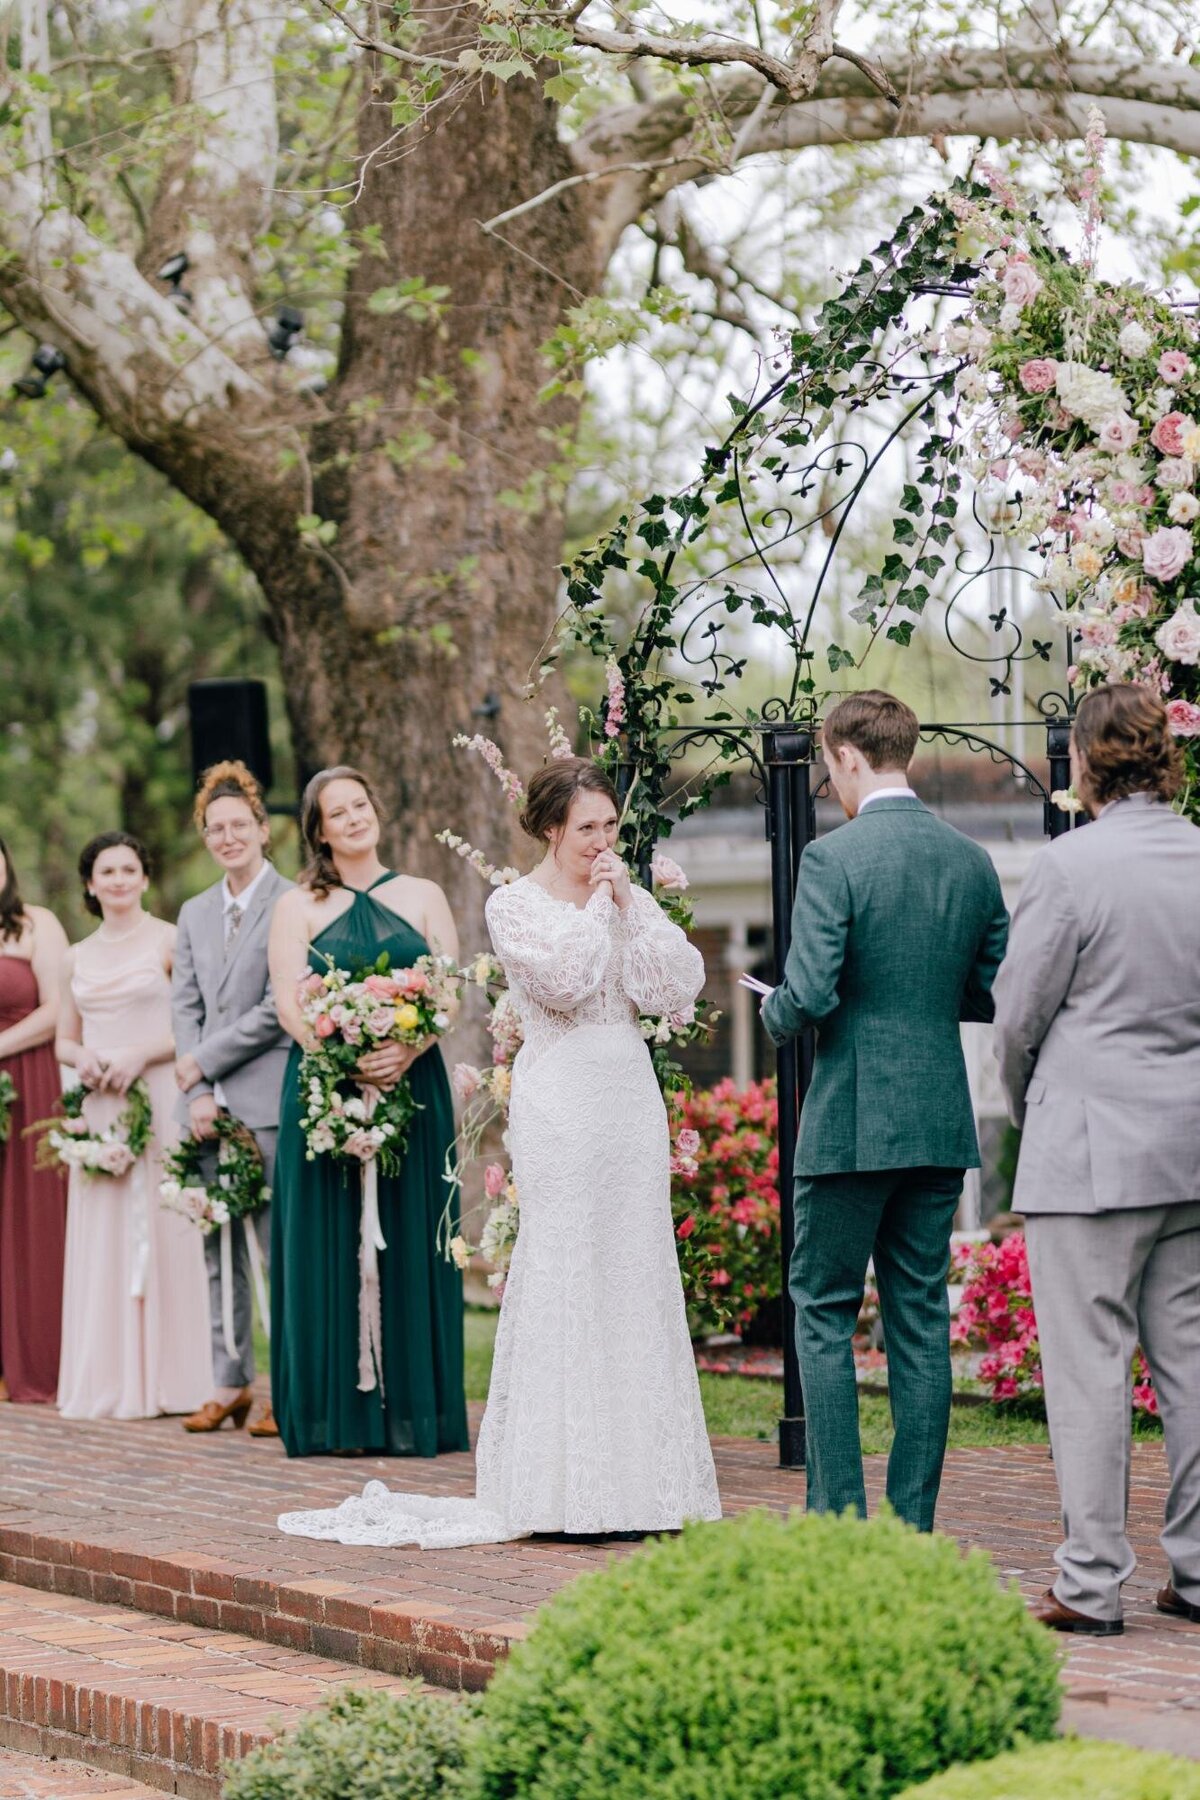 A bride and groom exchange vows at an outdoor wedding ceremony, with bridesmaids and guests watching.